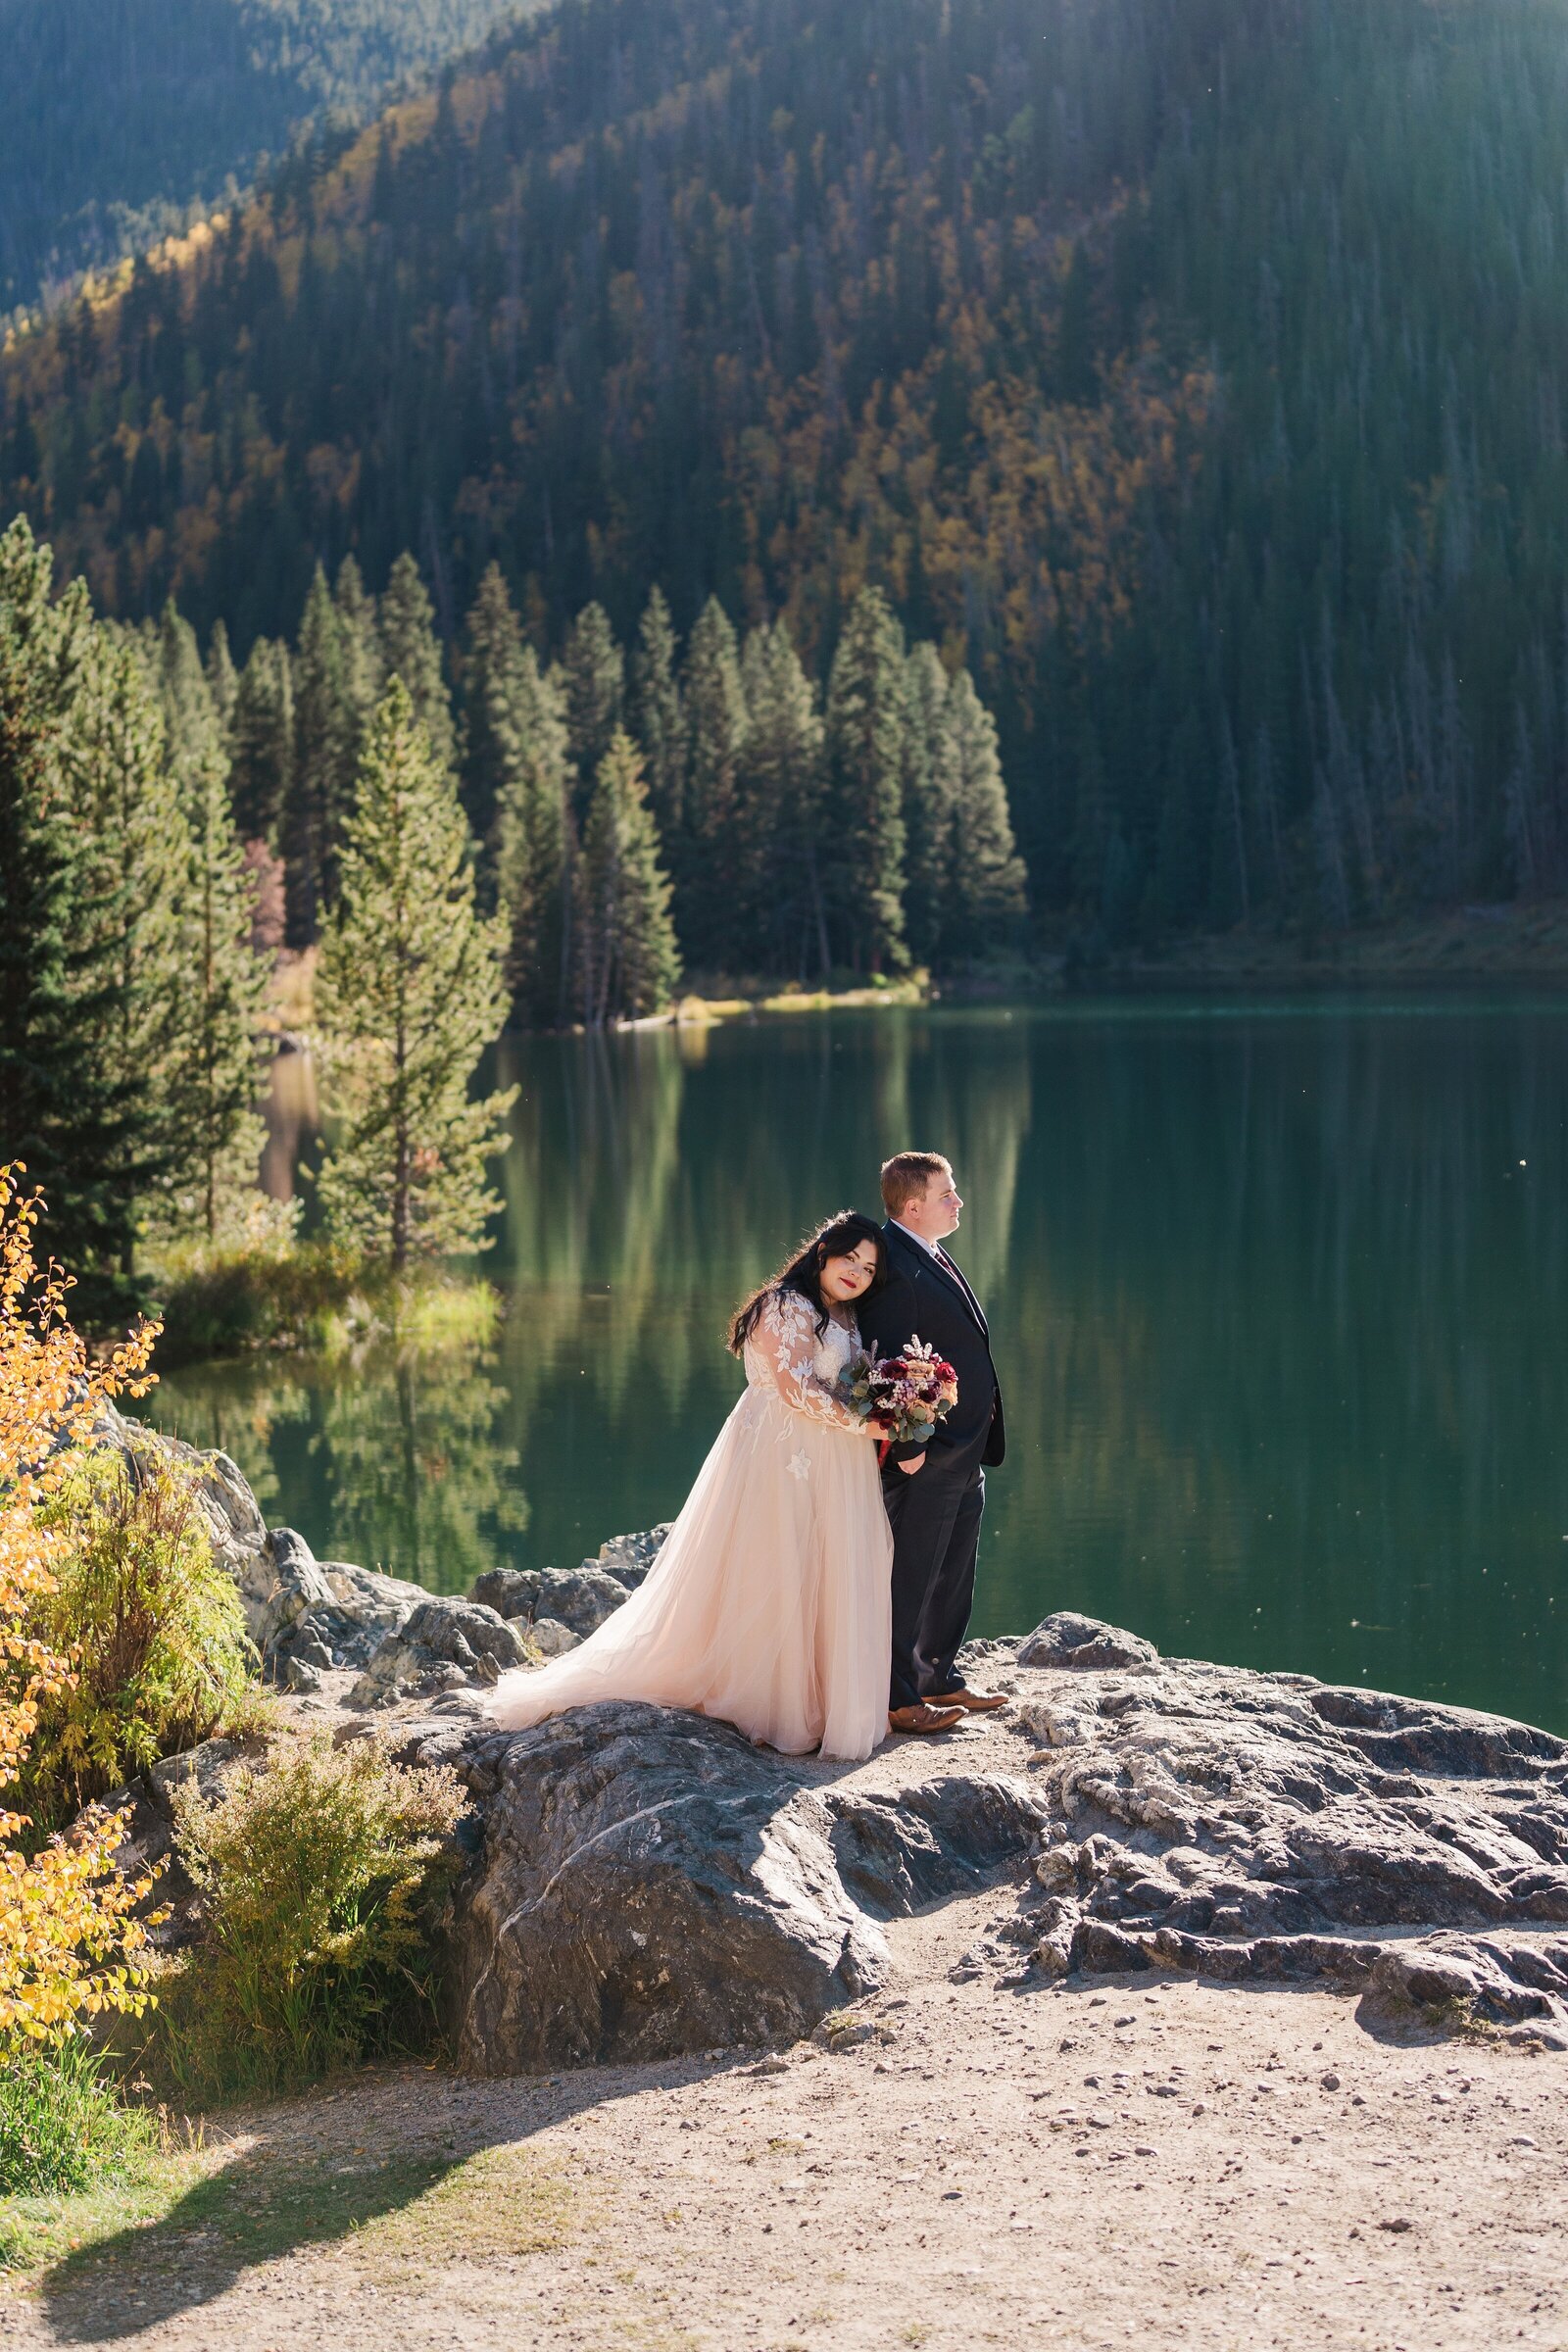 Commemorate your love story with an adventurous anniversary photo shoot with Samantha Immer Photography. Our storytelling and documentary-style approach will capture the essence of your relationship.